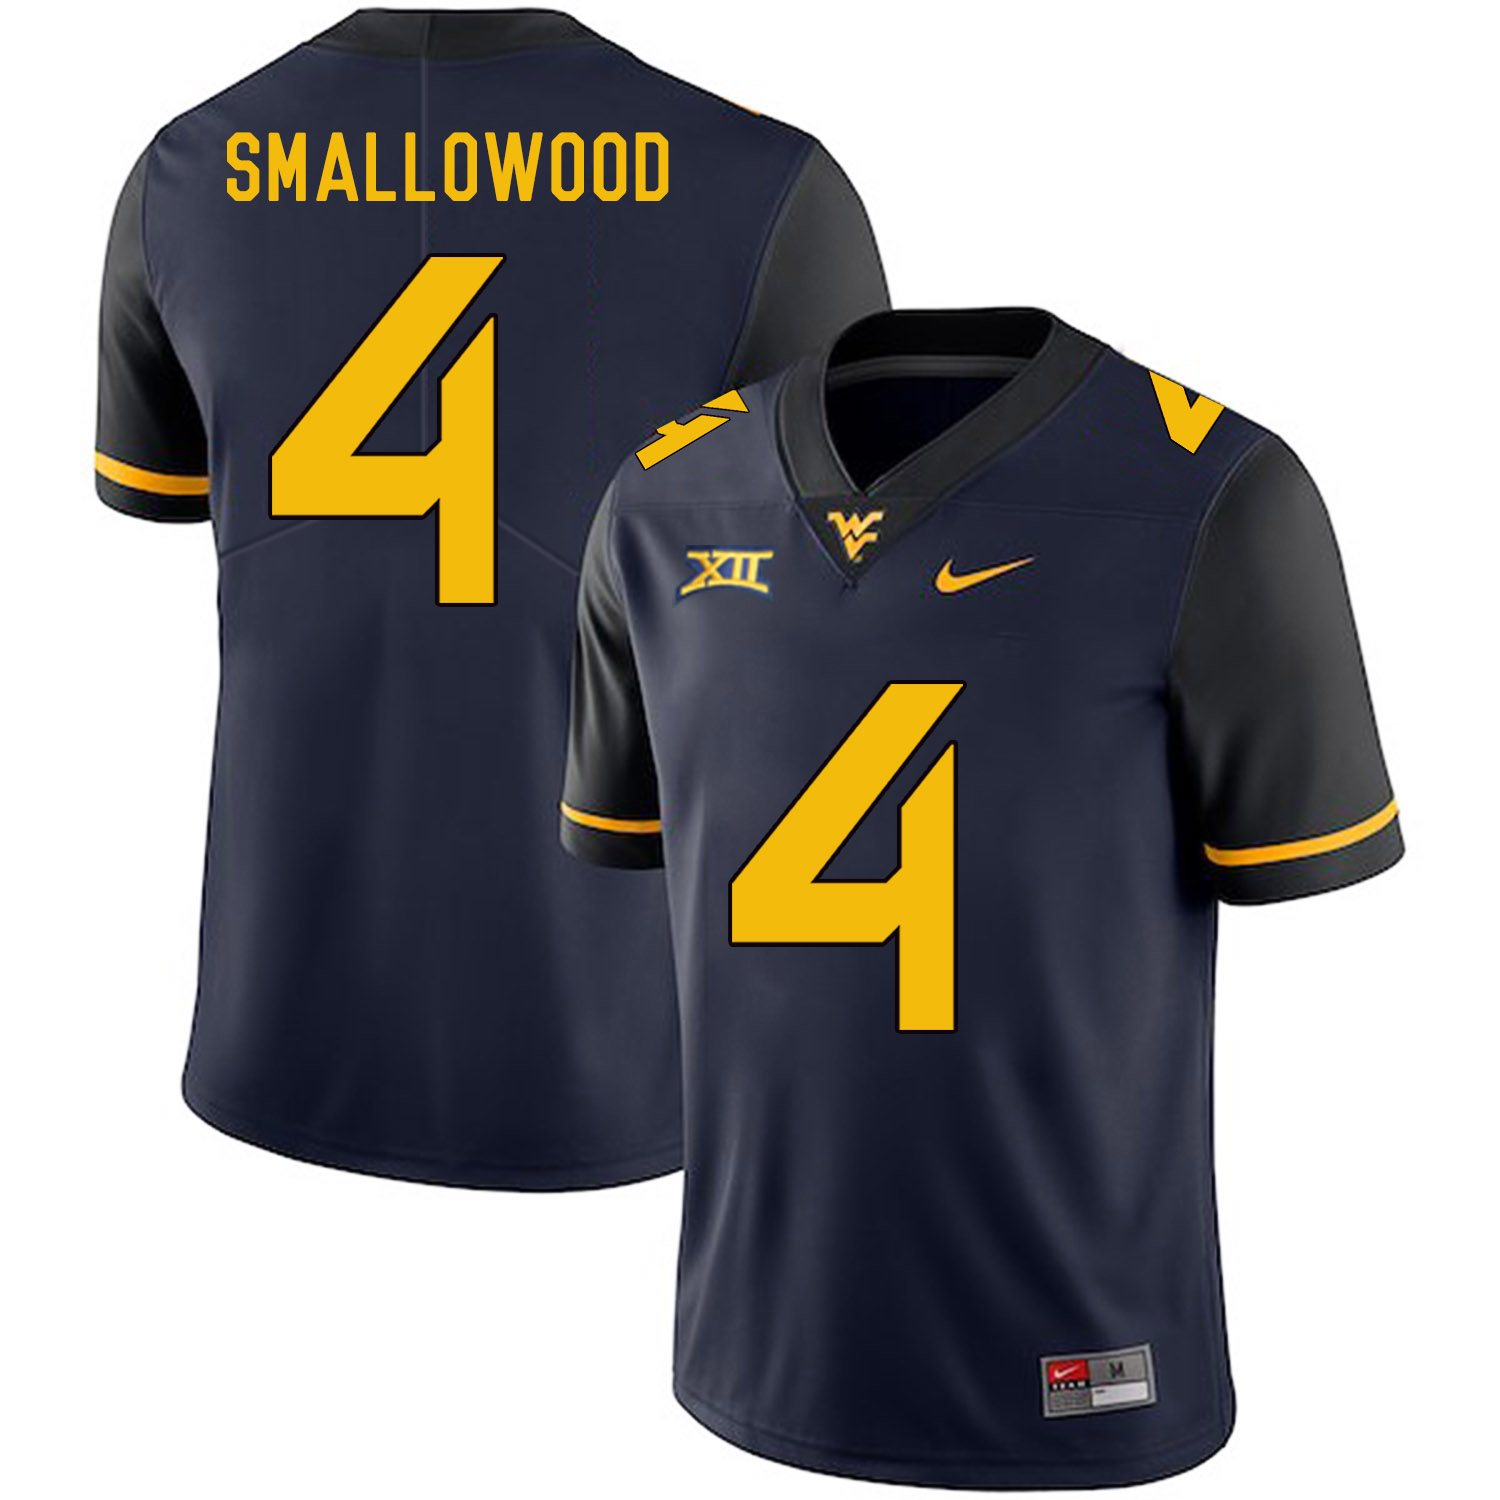 West Virginia Mountaineers 4 Wendell Smallwood Navy College Football Jersey